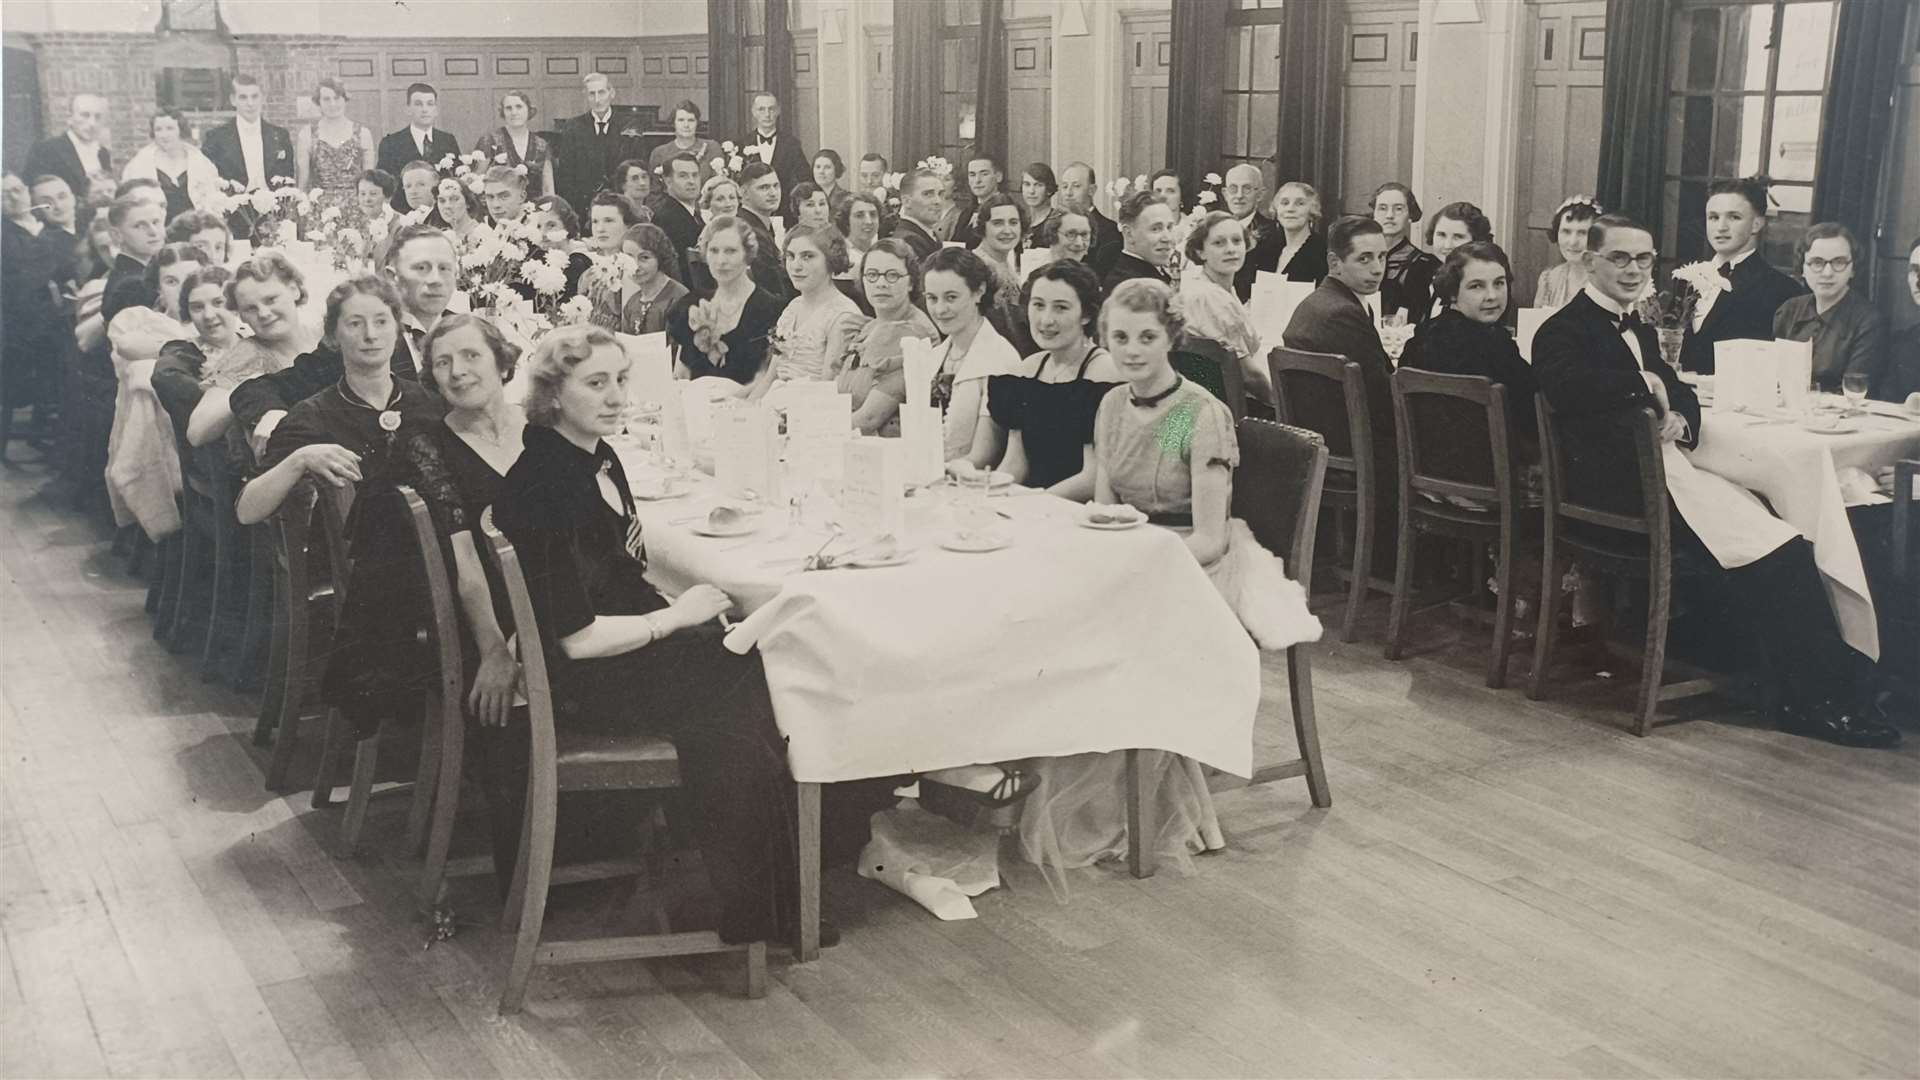 Penguins Suits in Chatham is closing. Employees at a sports and social club dinner in November 1938